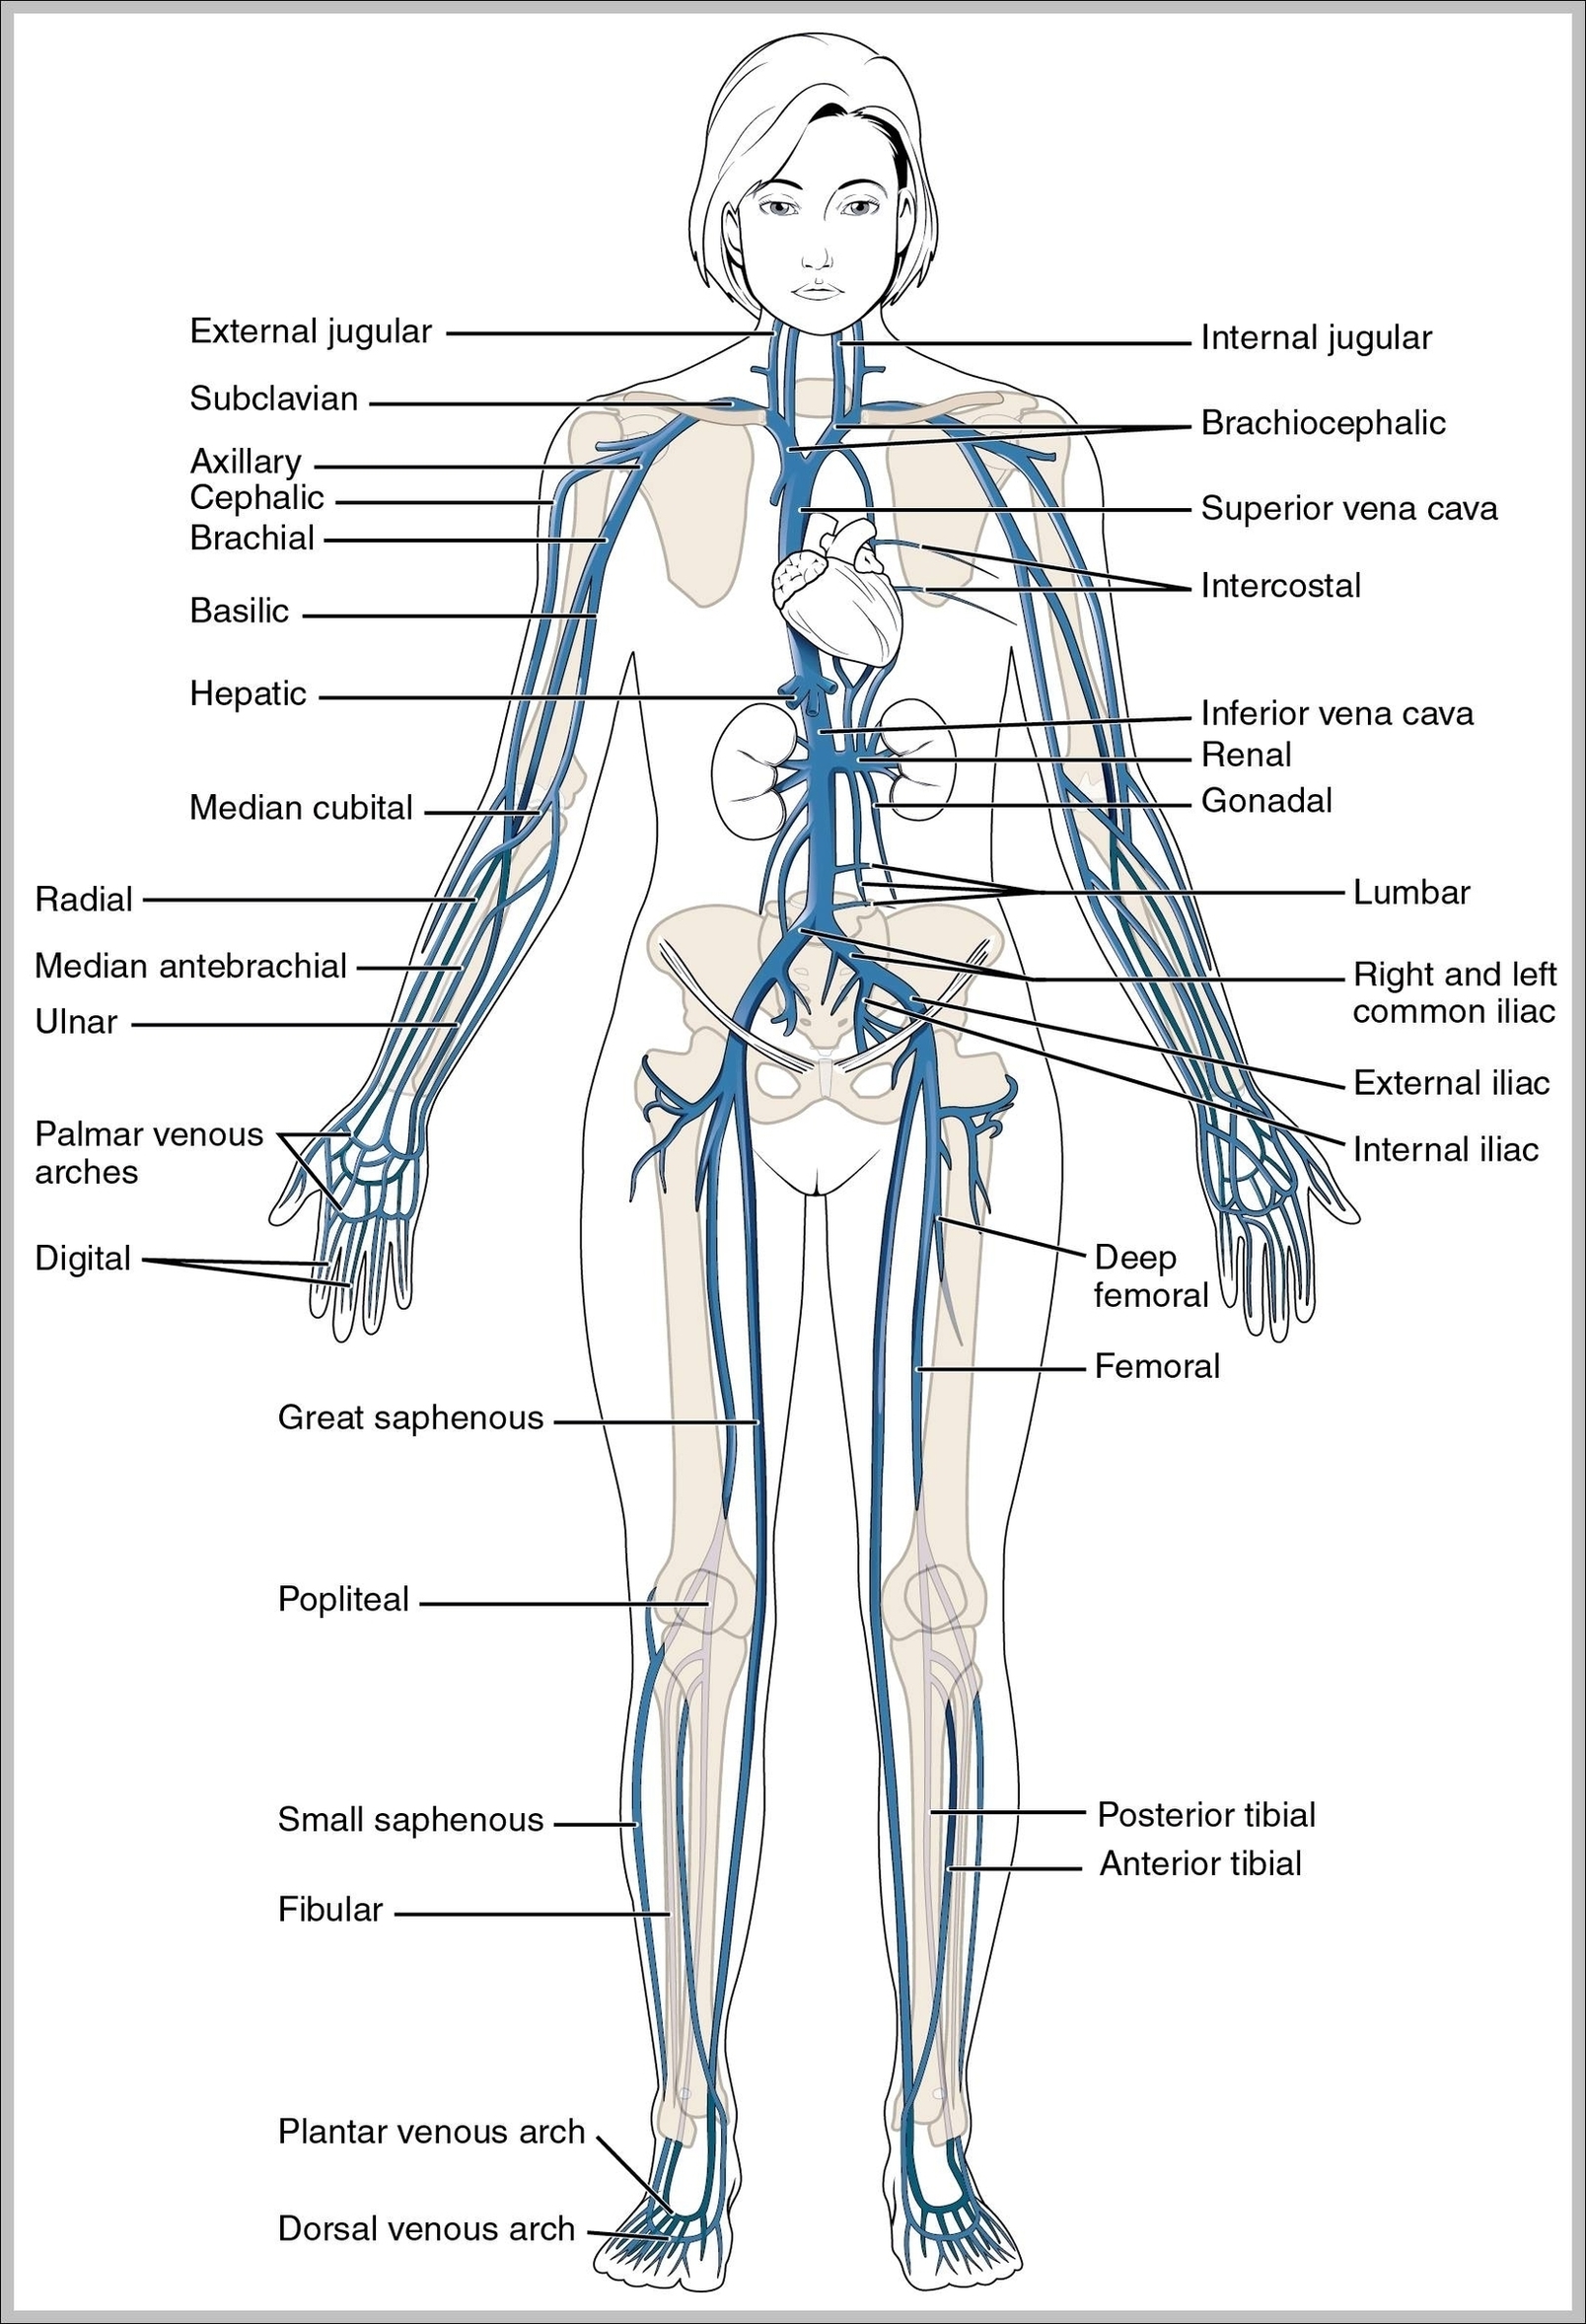 Veins In The Body Diagram Image